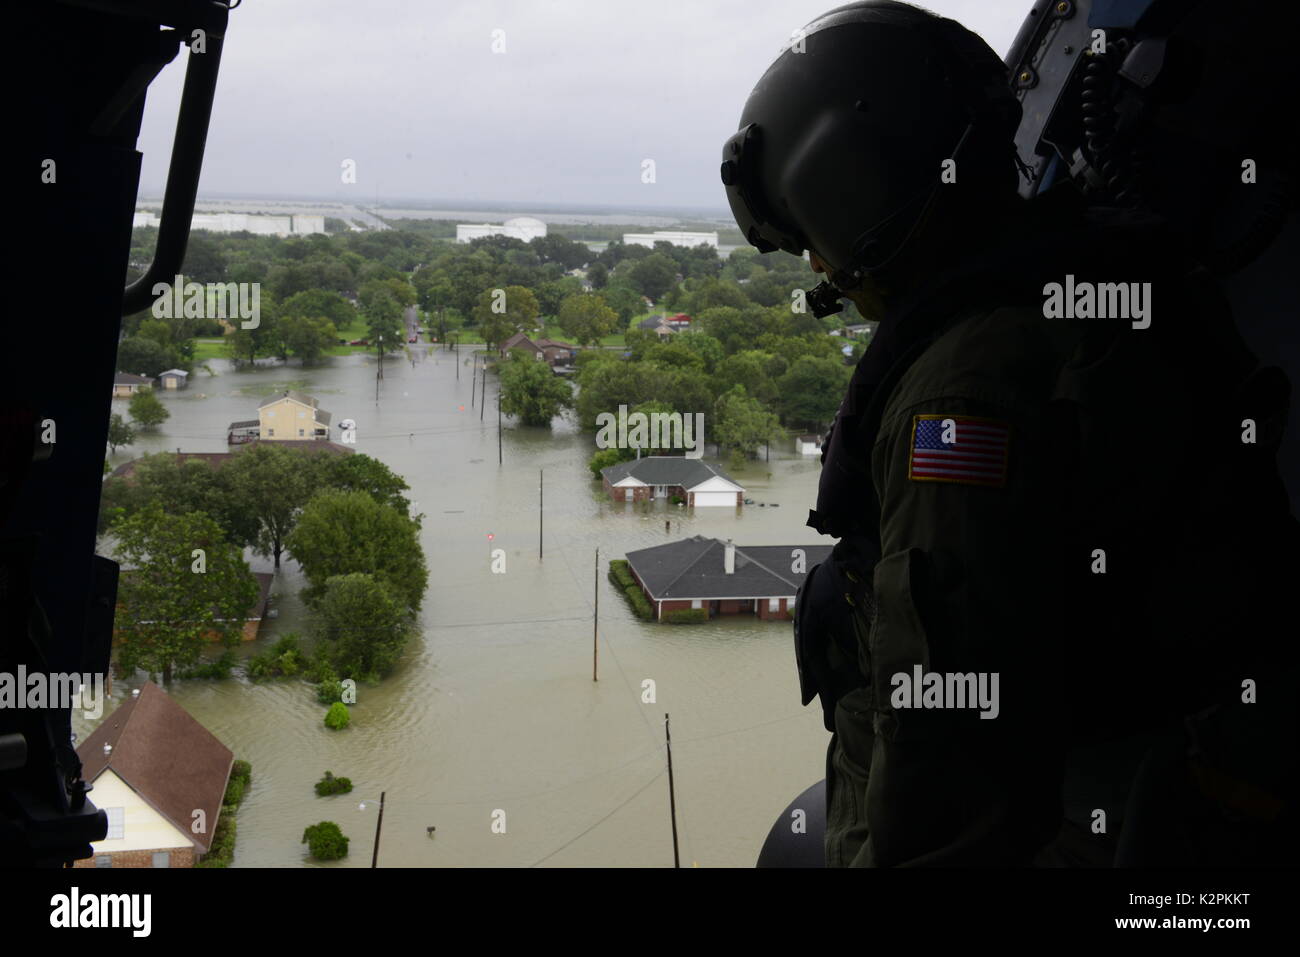 Beaumont, United States. 30th Aug, 2017. U.S. Coast Guard aircrew personnel look out at flood neighborhoods as they respond to an emergency evacuation by helicopter in the aftermath of Hurricane Harvey August 30, 2017 in Beaumont, Texas. Credit: Planetpix/Alamy Live News Stock Photo